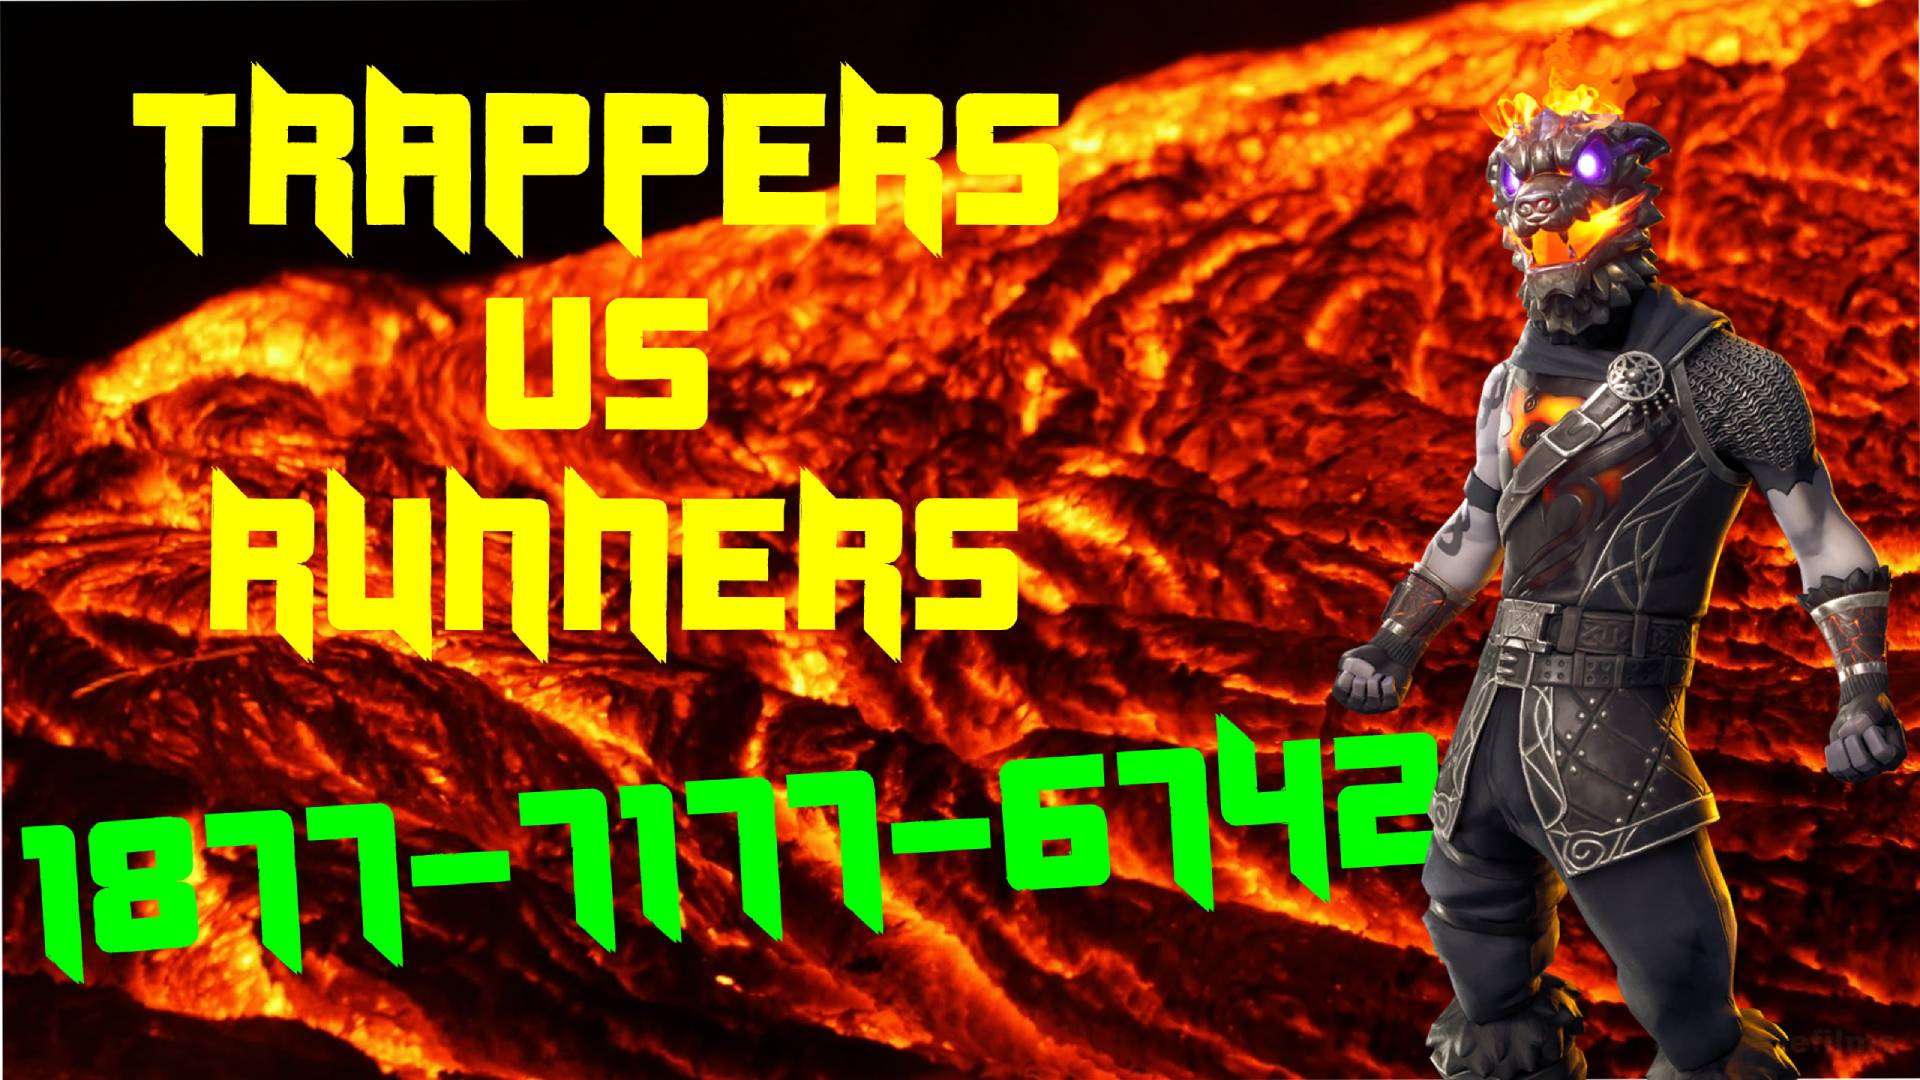 TRAPPERS VS RUNNERS (LAVA)